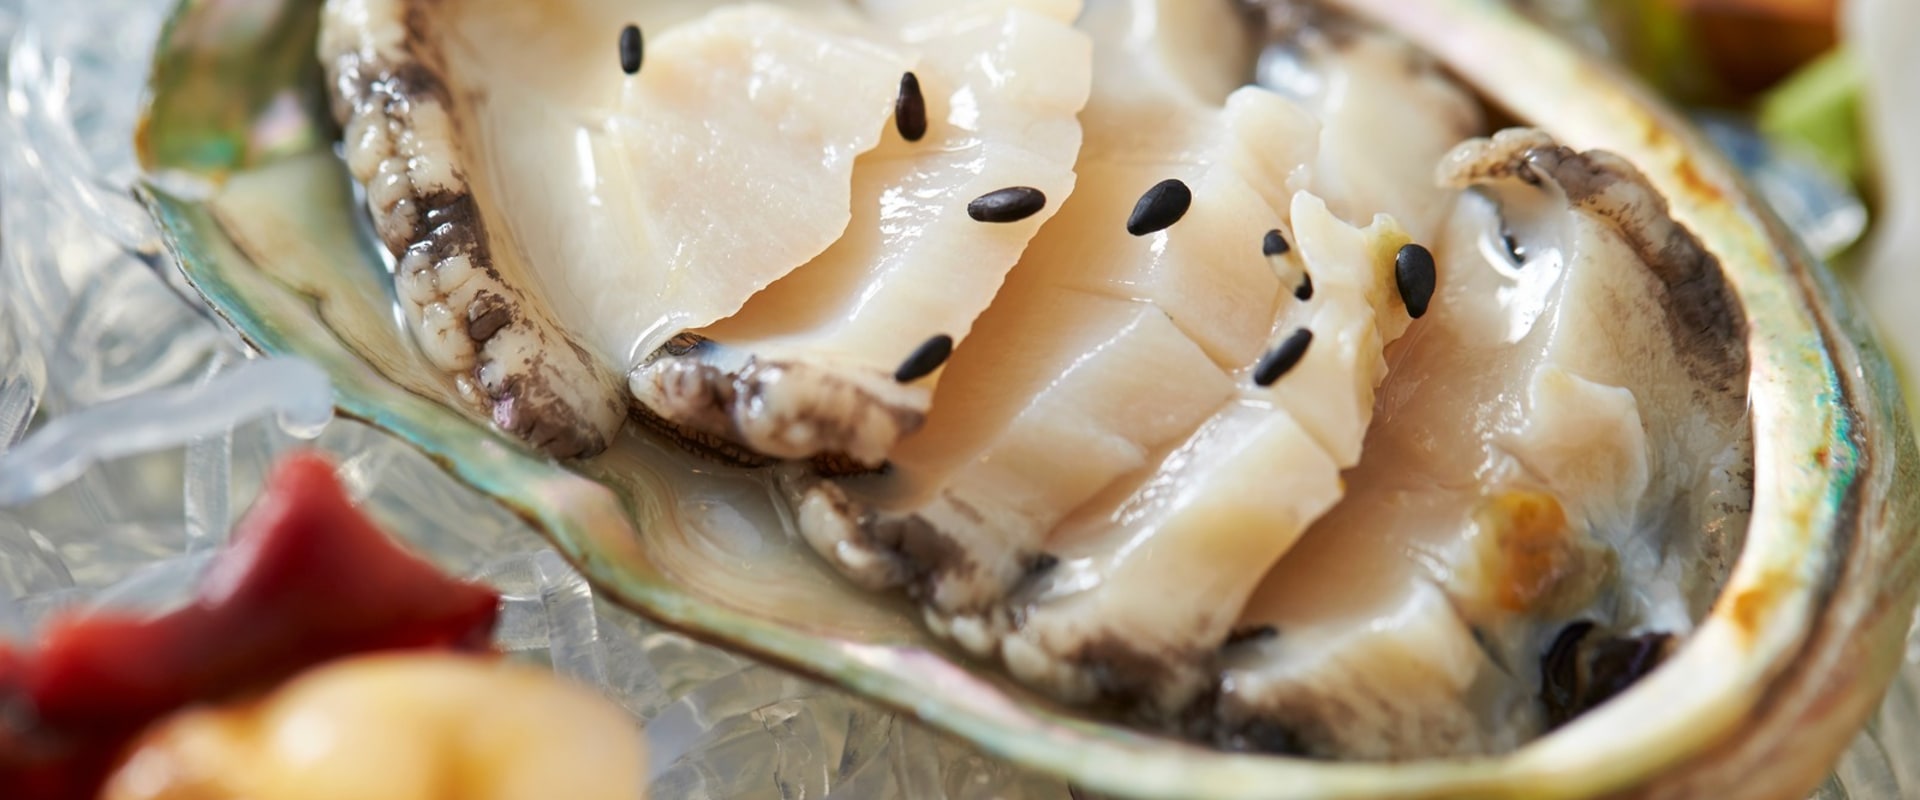 Tips for Steaming Abalones Without Drying Them Out